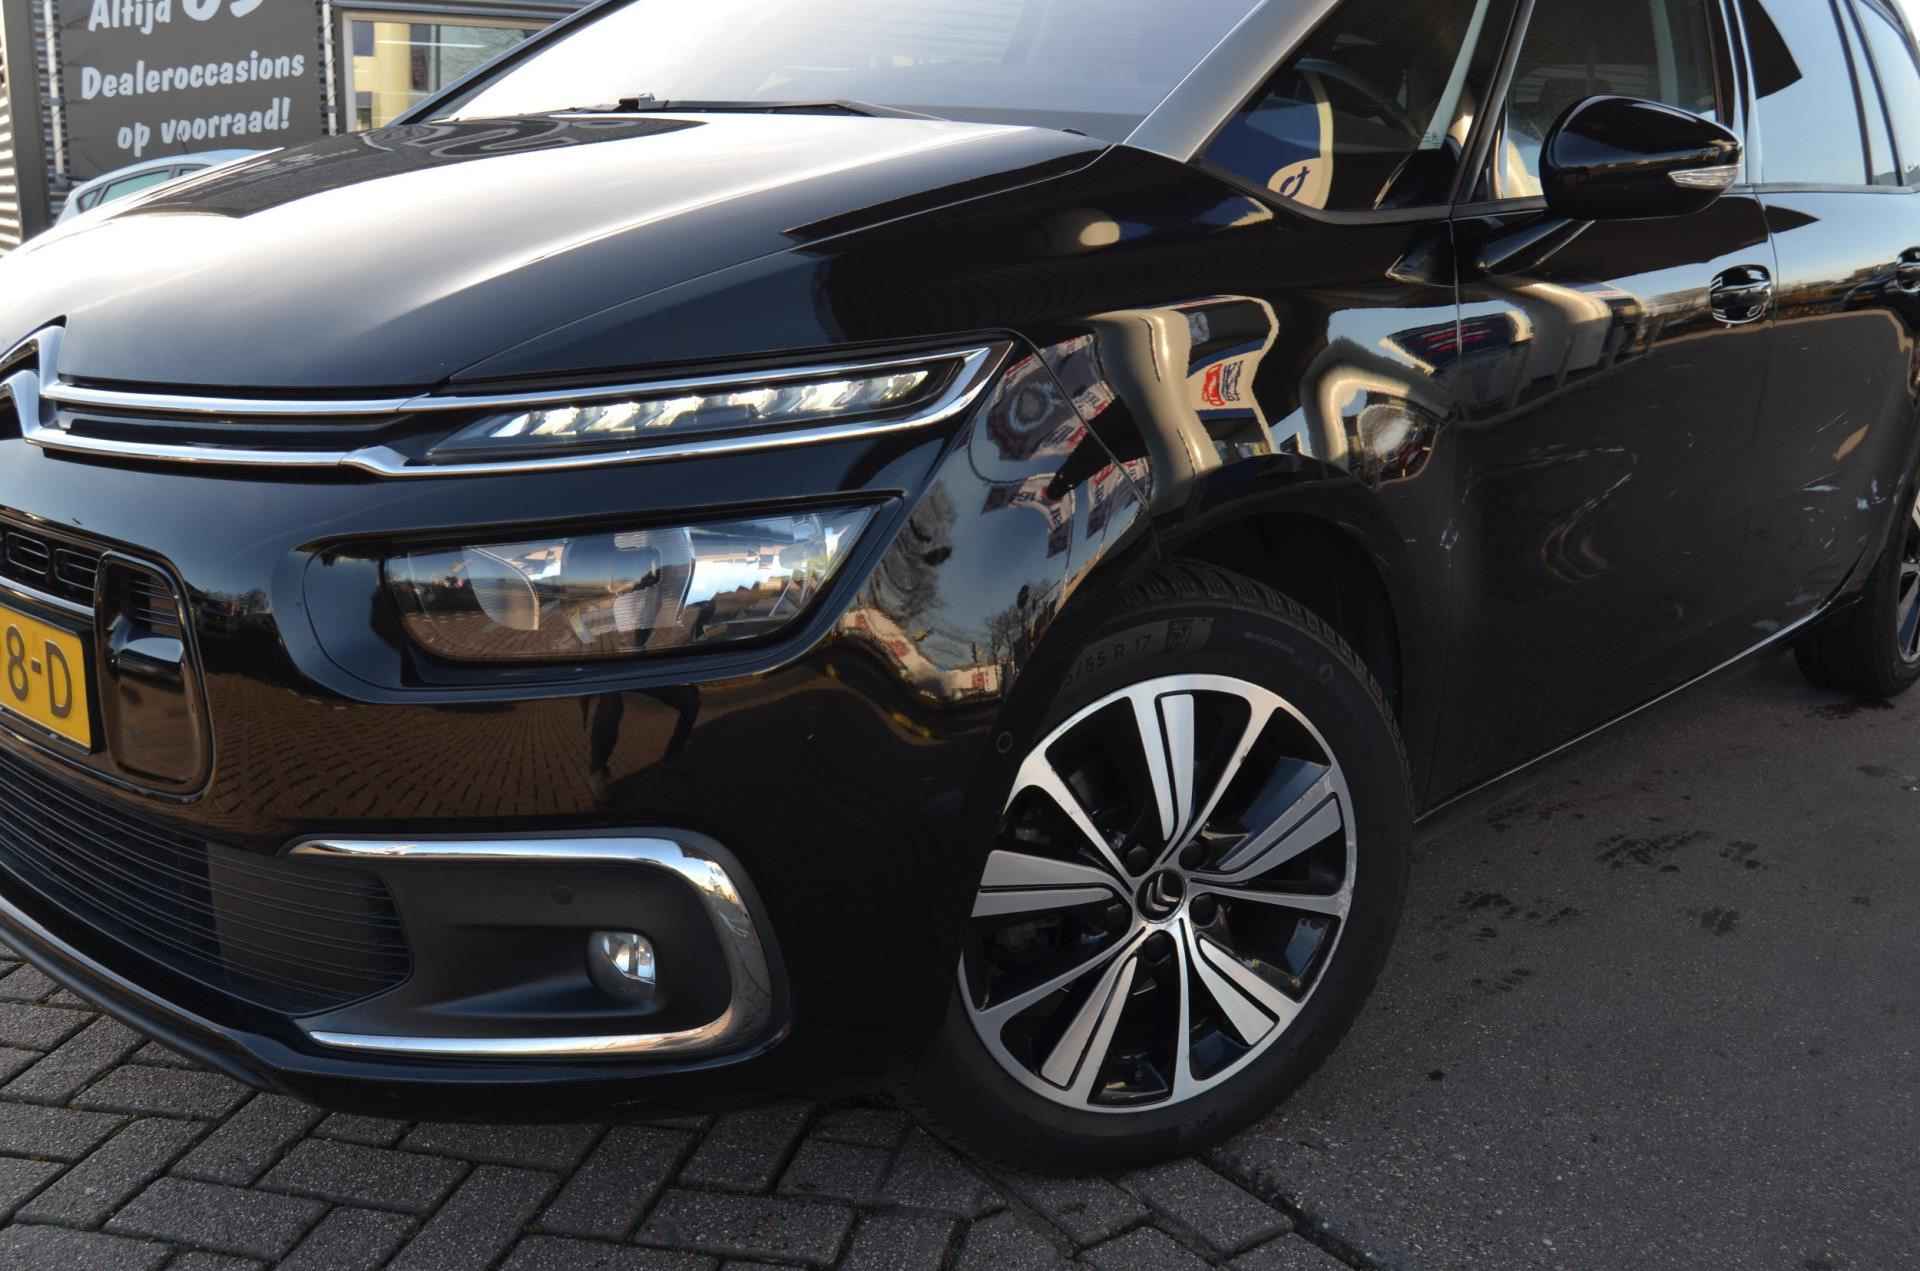 Citroen Grand C4 Picasso 1.2 7 PERS|7 PERSOONS|2E PAASDAG OPEN. - 4/30